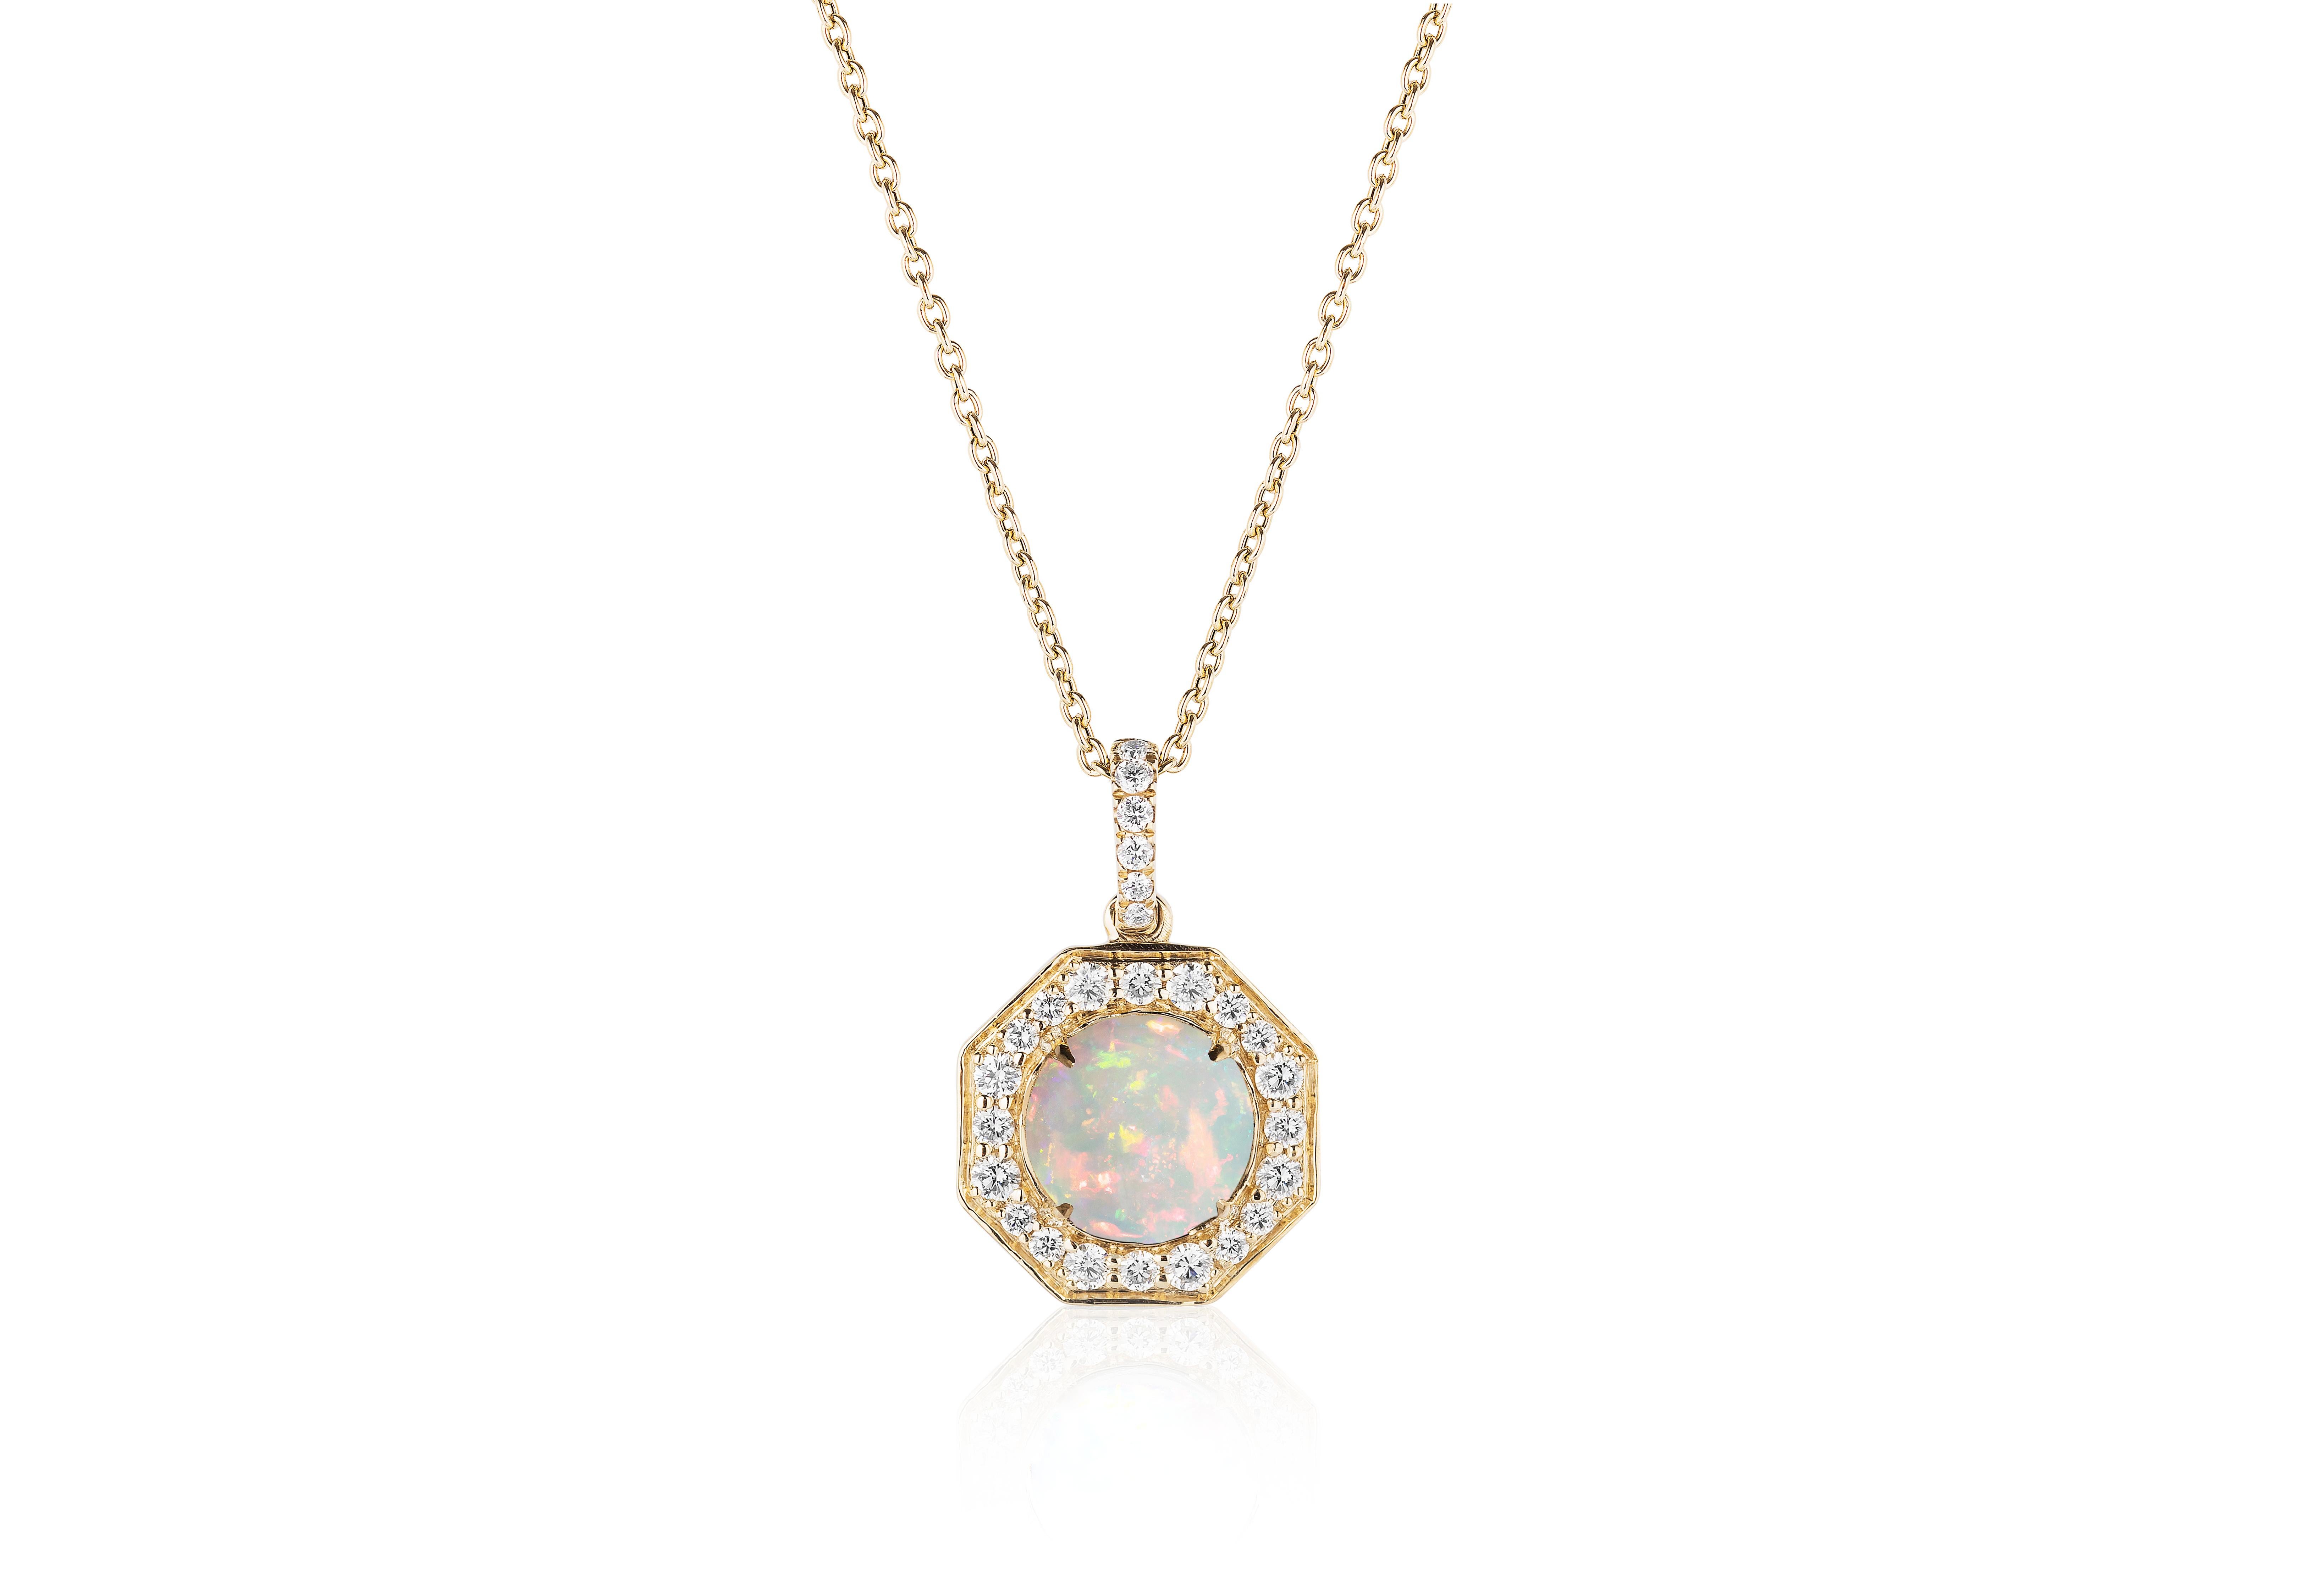 Opal Cab Small Pendant with Diamonds in 18K Yellow Gold, from 'Rock N Roll' Collection

Stone Size: 8 mm

Gemstone Weight: Opal- 1.29 Carats

Diamond: G-H / VS, Approx Wt: 0.36 Carats